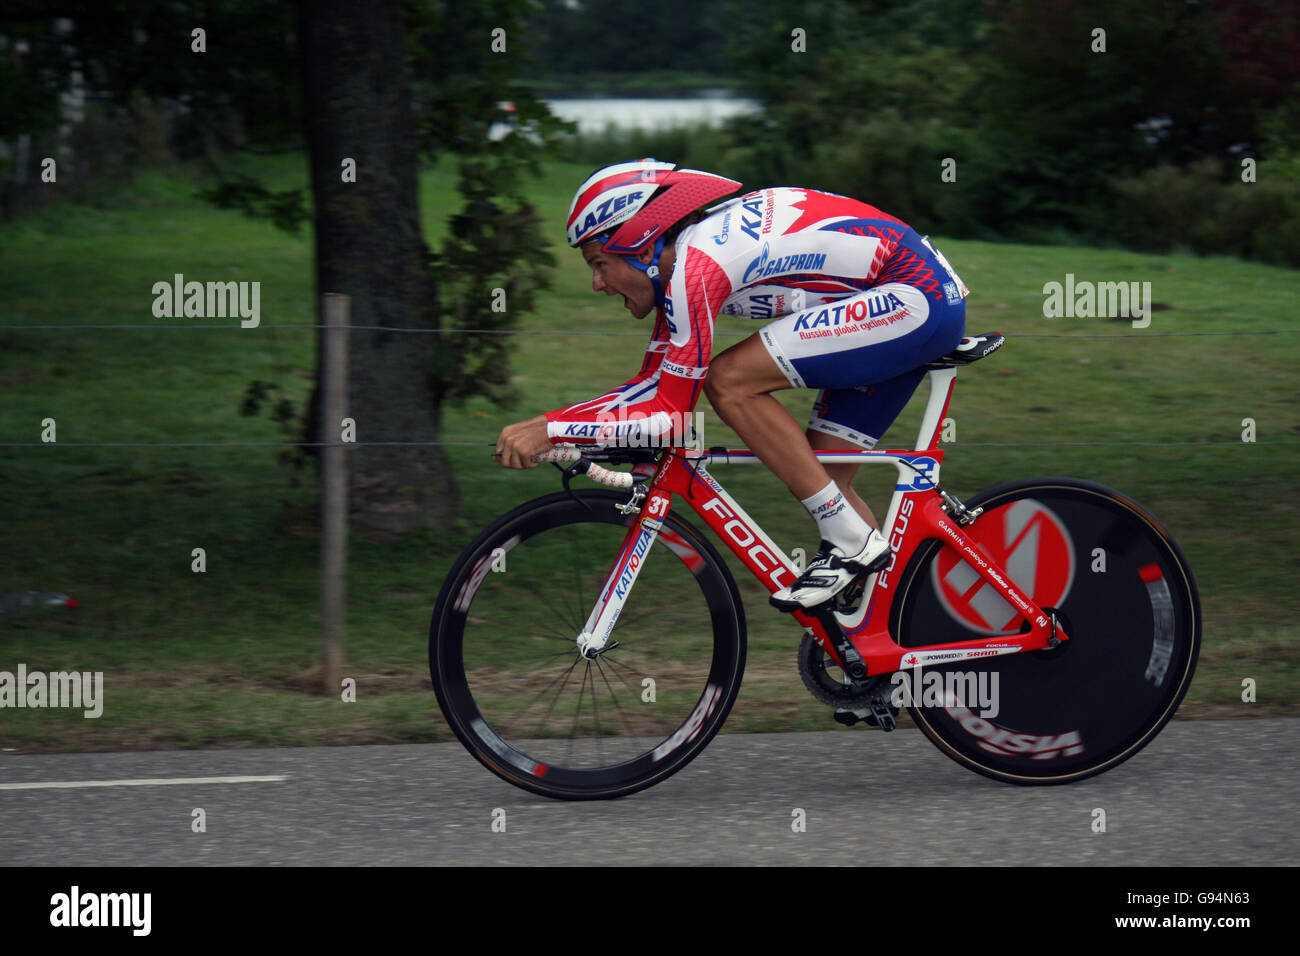 ROERMOND, HOLLAND - AUGUSTUS 12  Proffesional cyclist From team Team Katusha during time trial of Eneco cycling tour Stock Photo